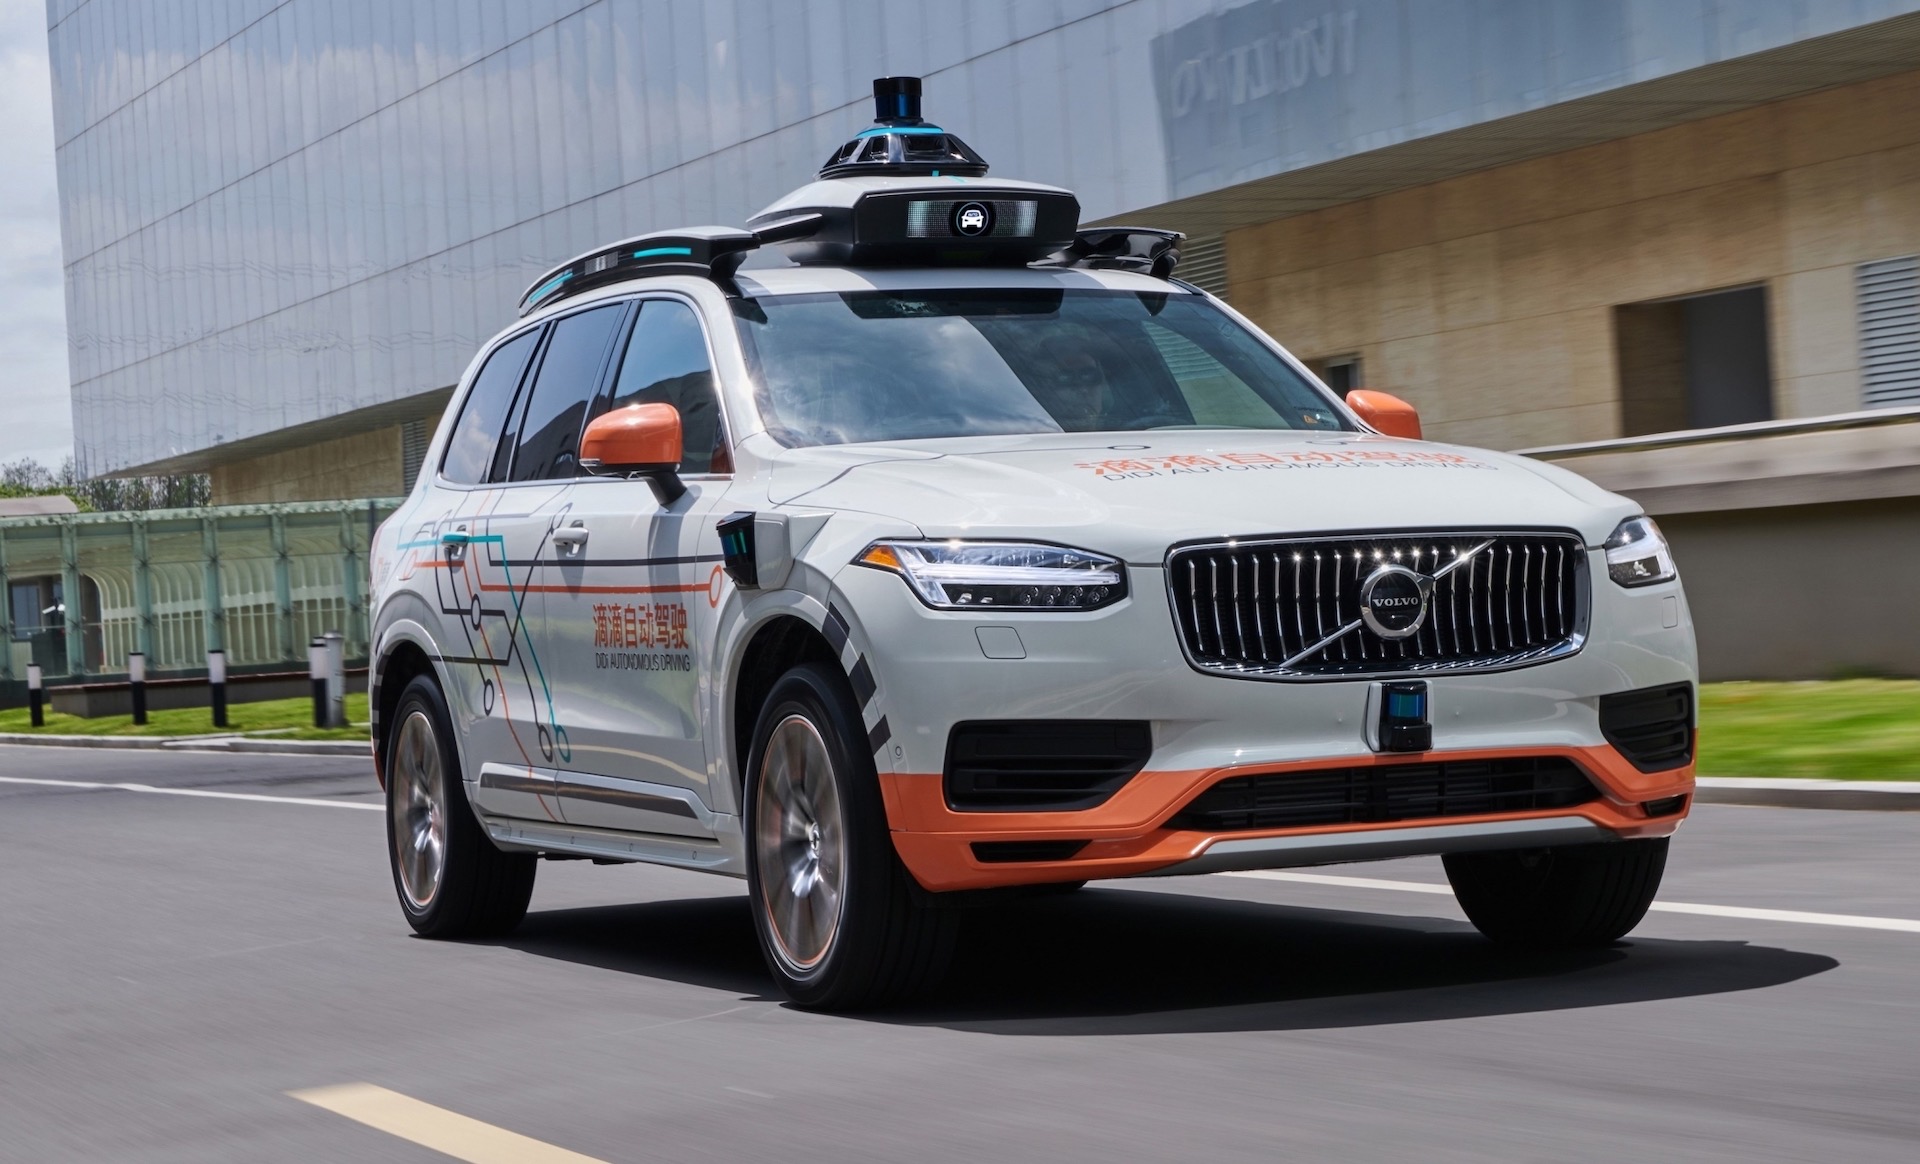 Volvo teams up with DiDi for self-driving taxis